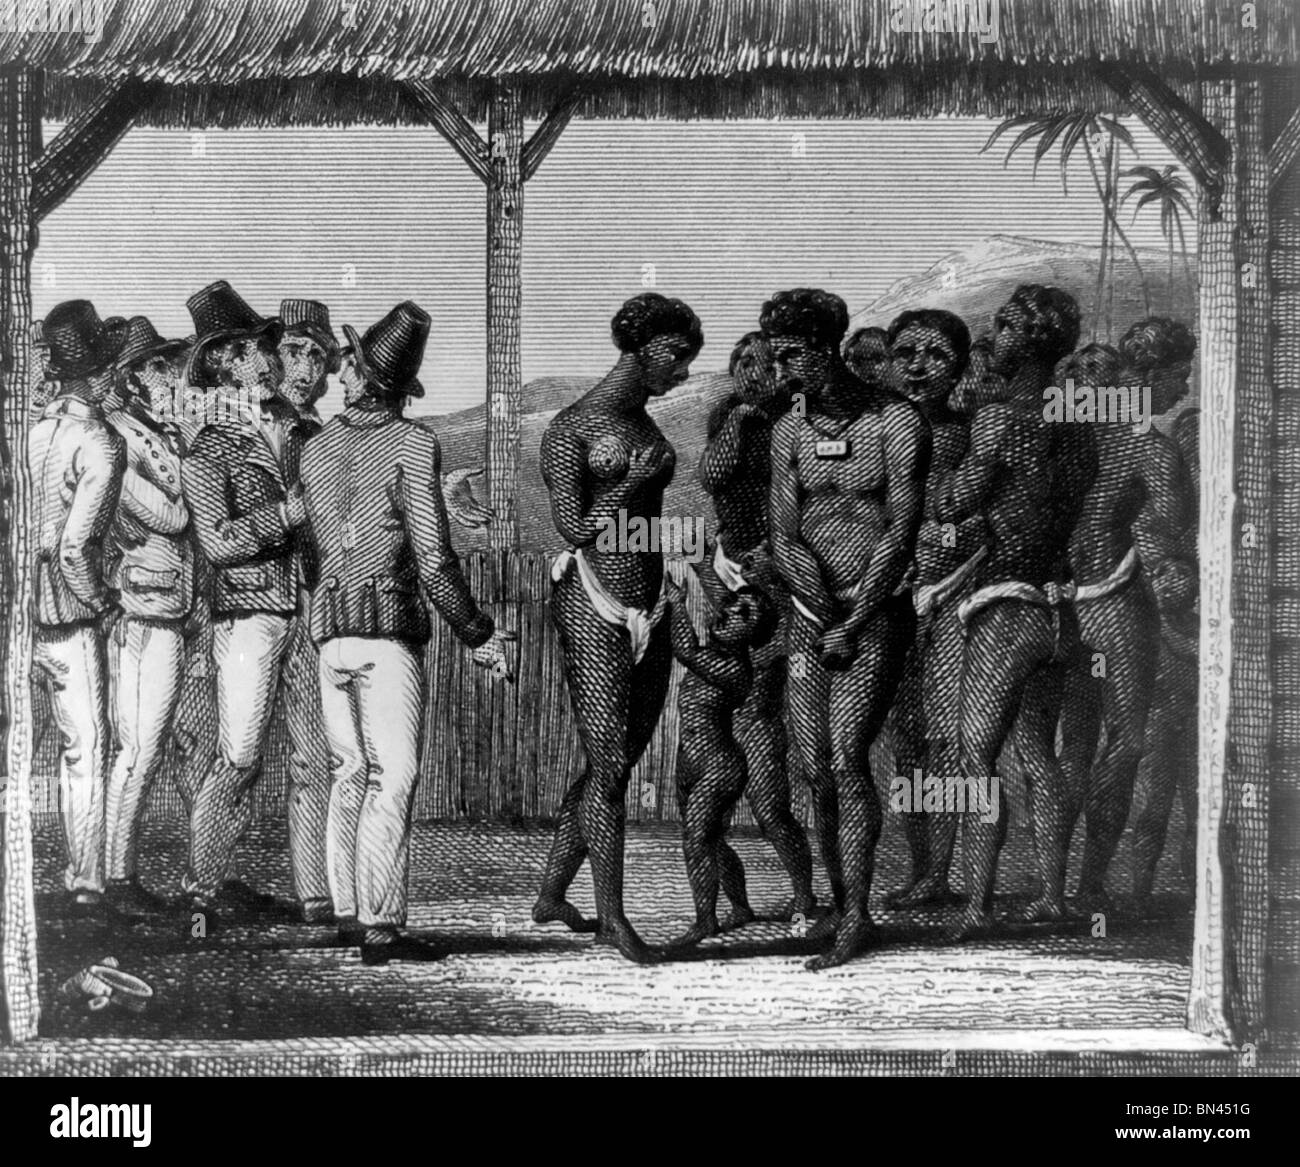 Slaves exposed for sale - Slave market Stock Photo